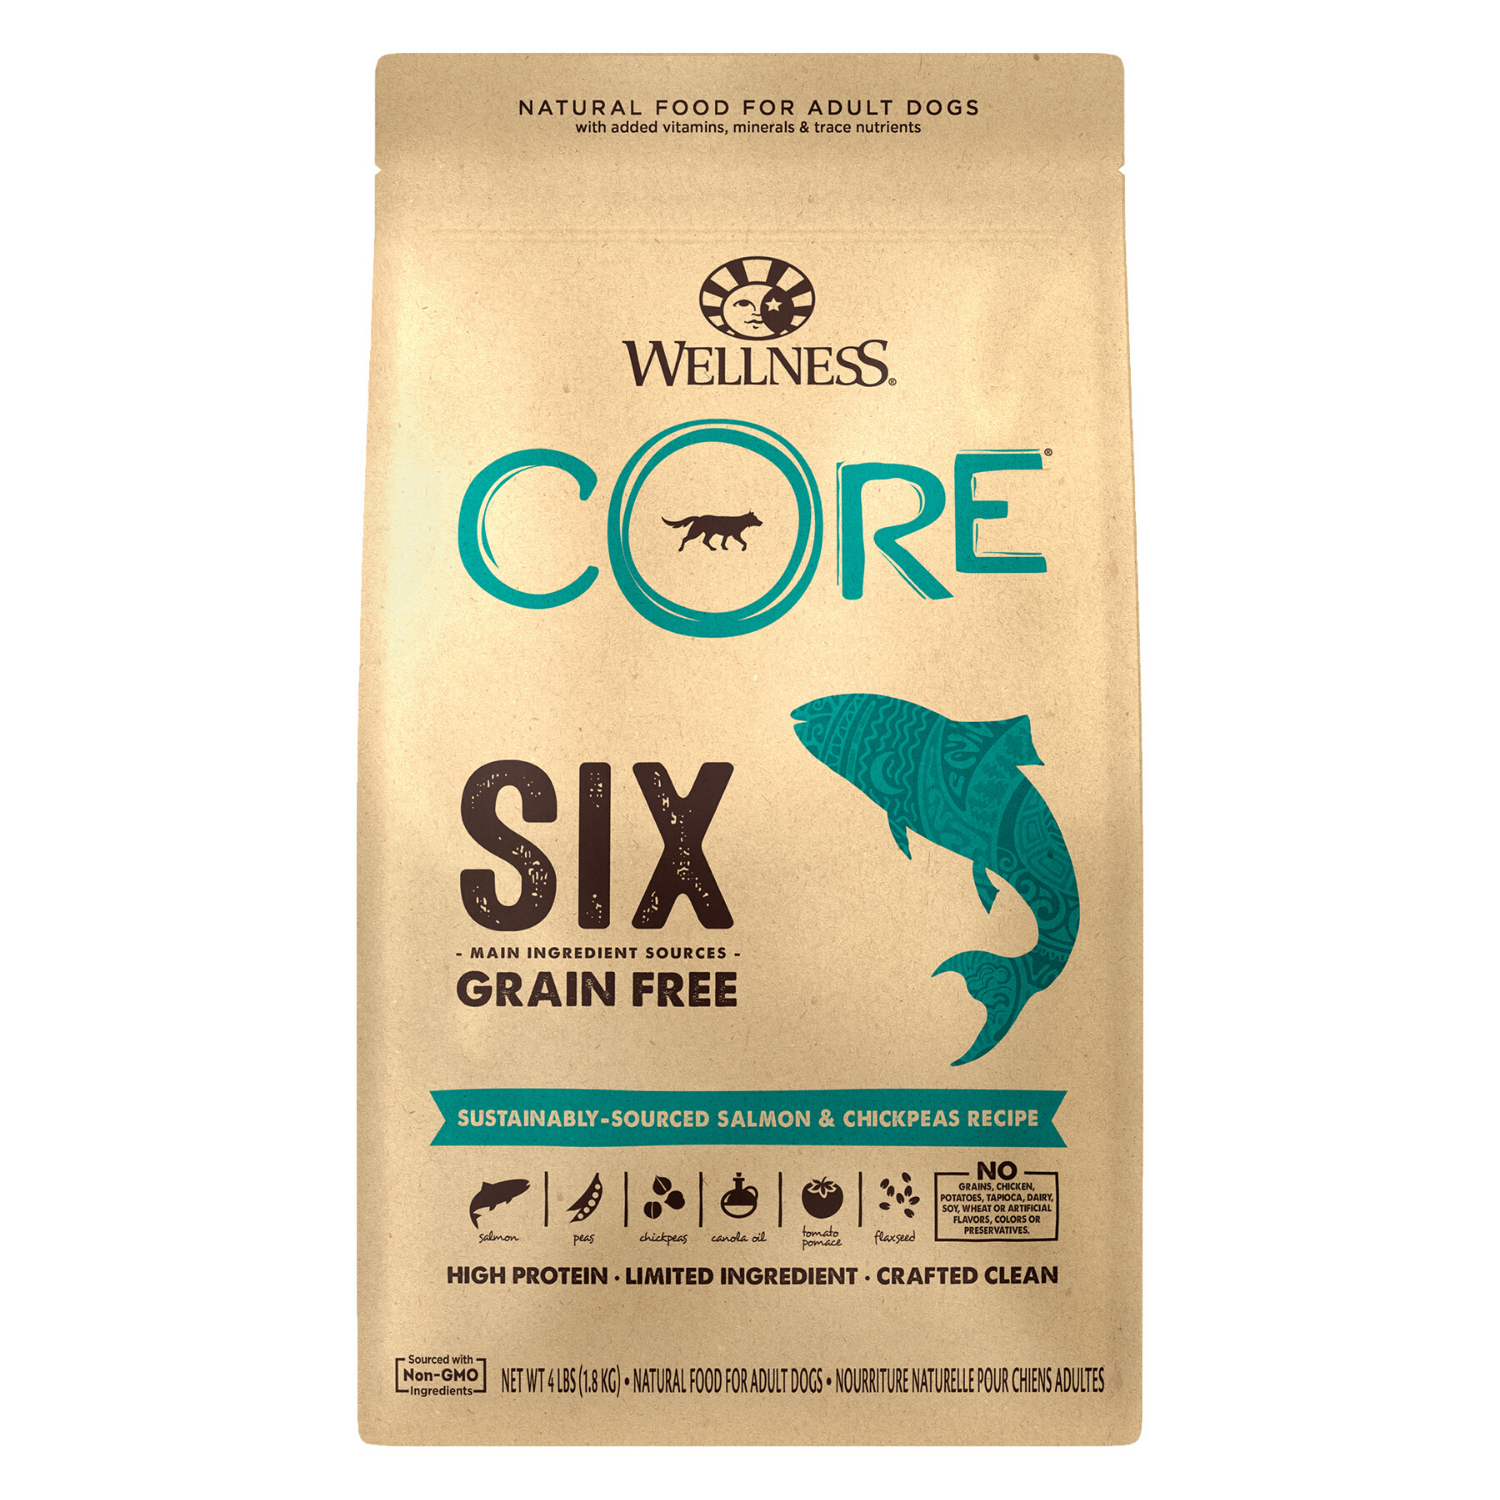 [DISCONTINUED] Wellness CORE SIX (Sustainably-Sourced Salmon & Chickpeas Recipe) - 1.81kg / 9.98kg